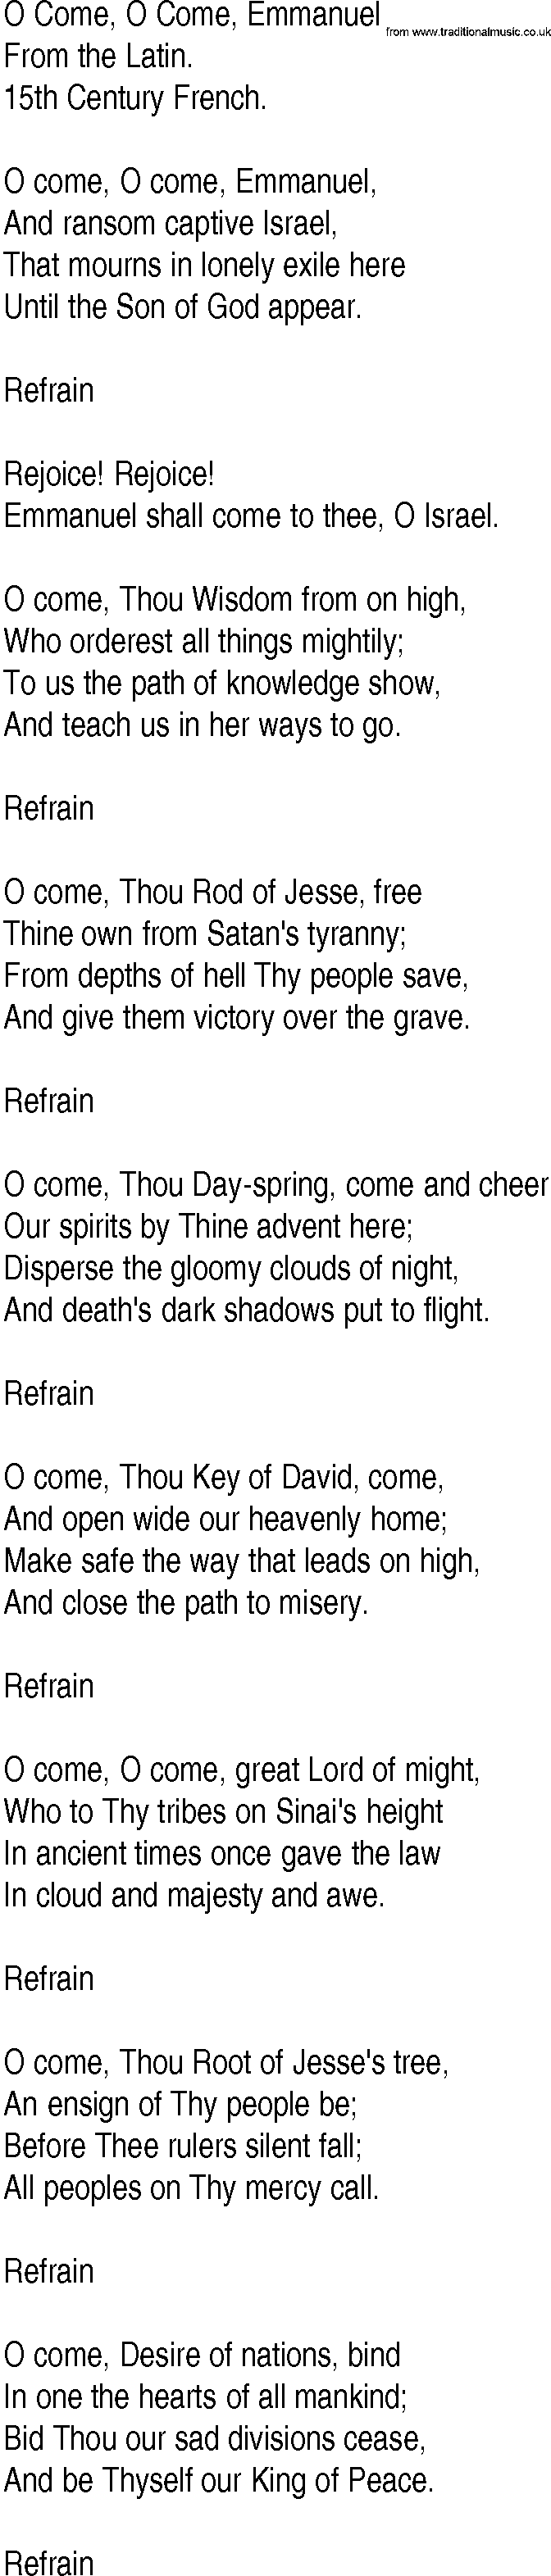 Hymn and Gospel Song: O Come, O Come, Emmanuel by From the Latin lyrics